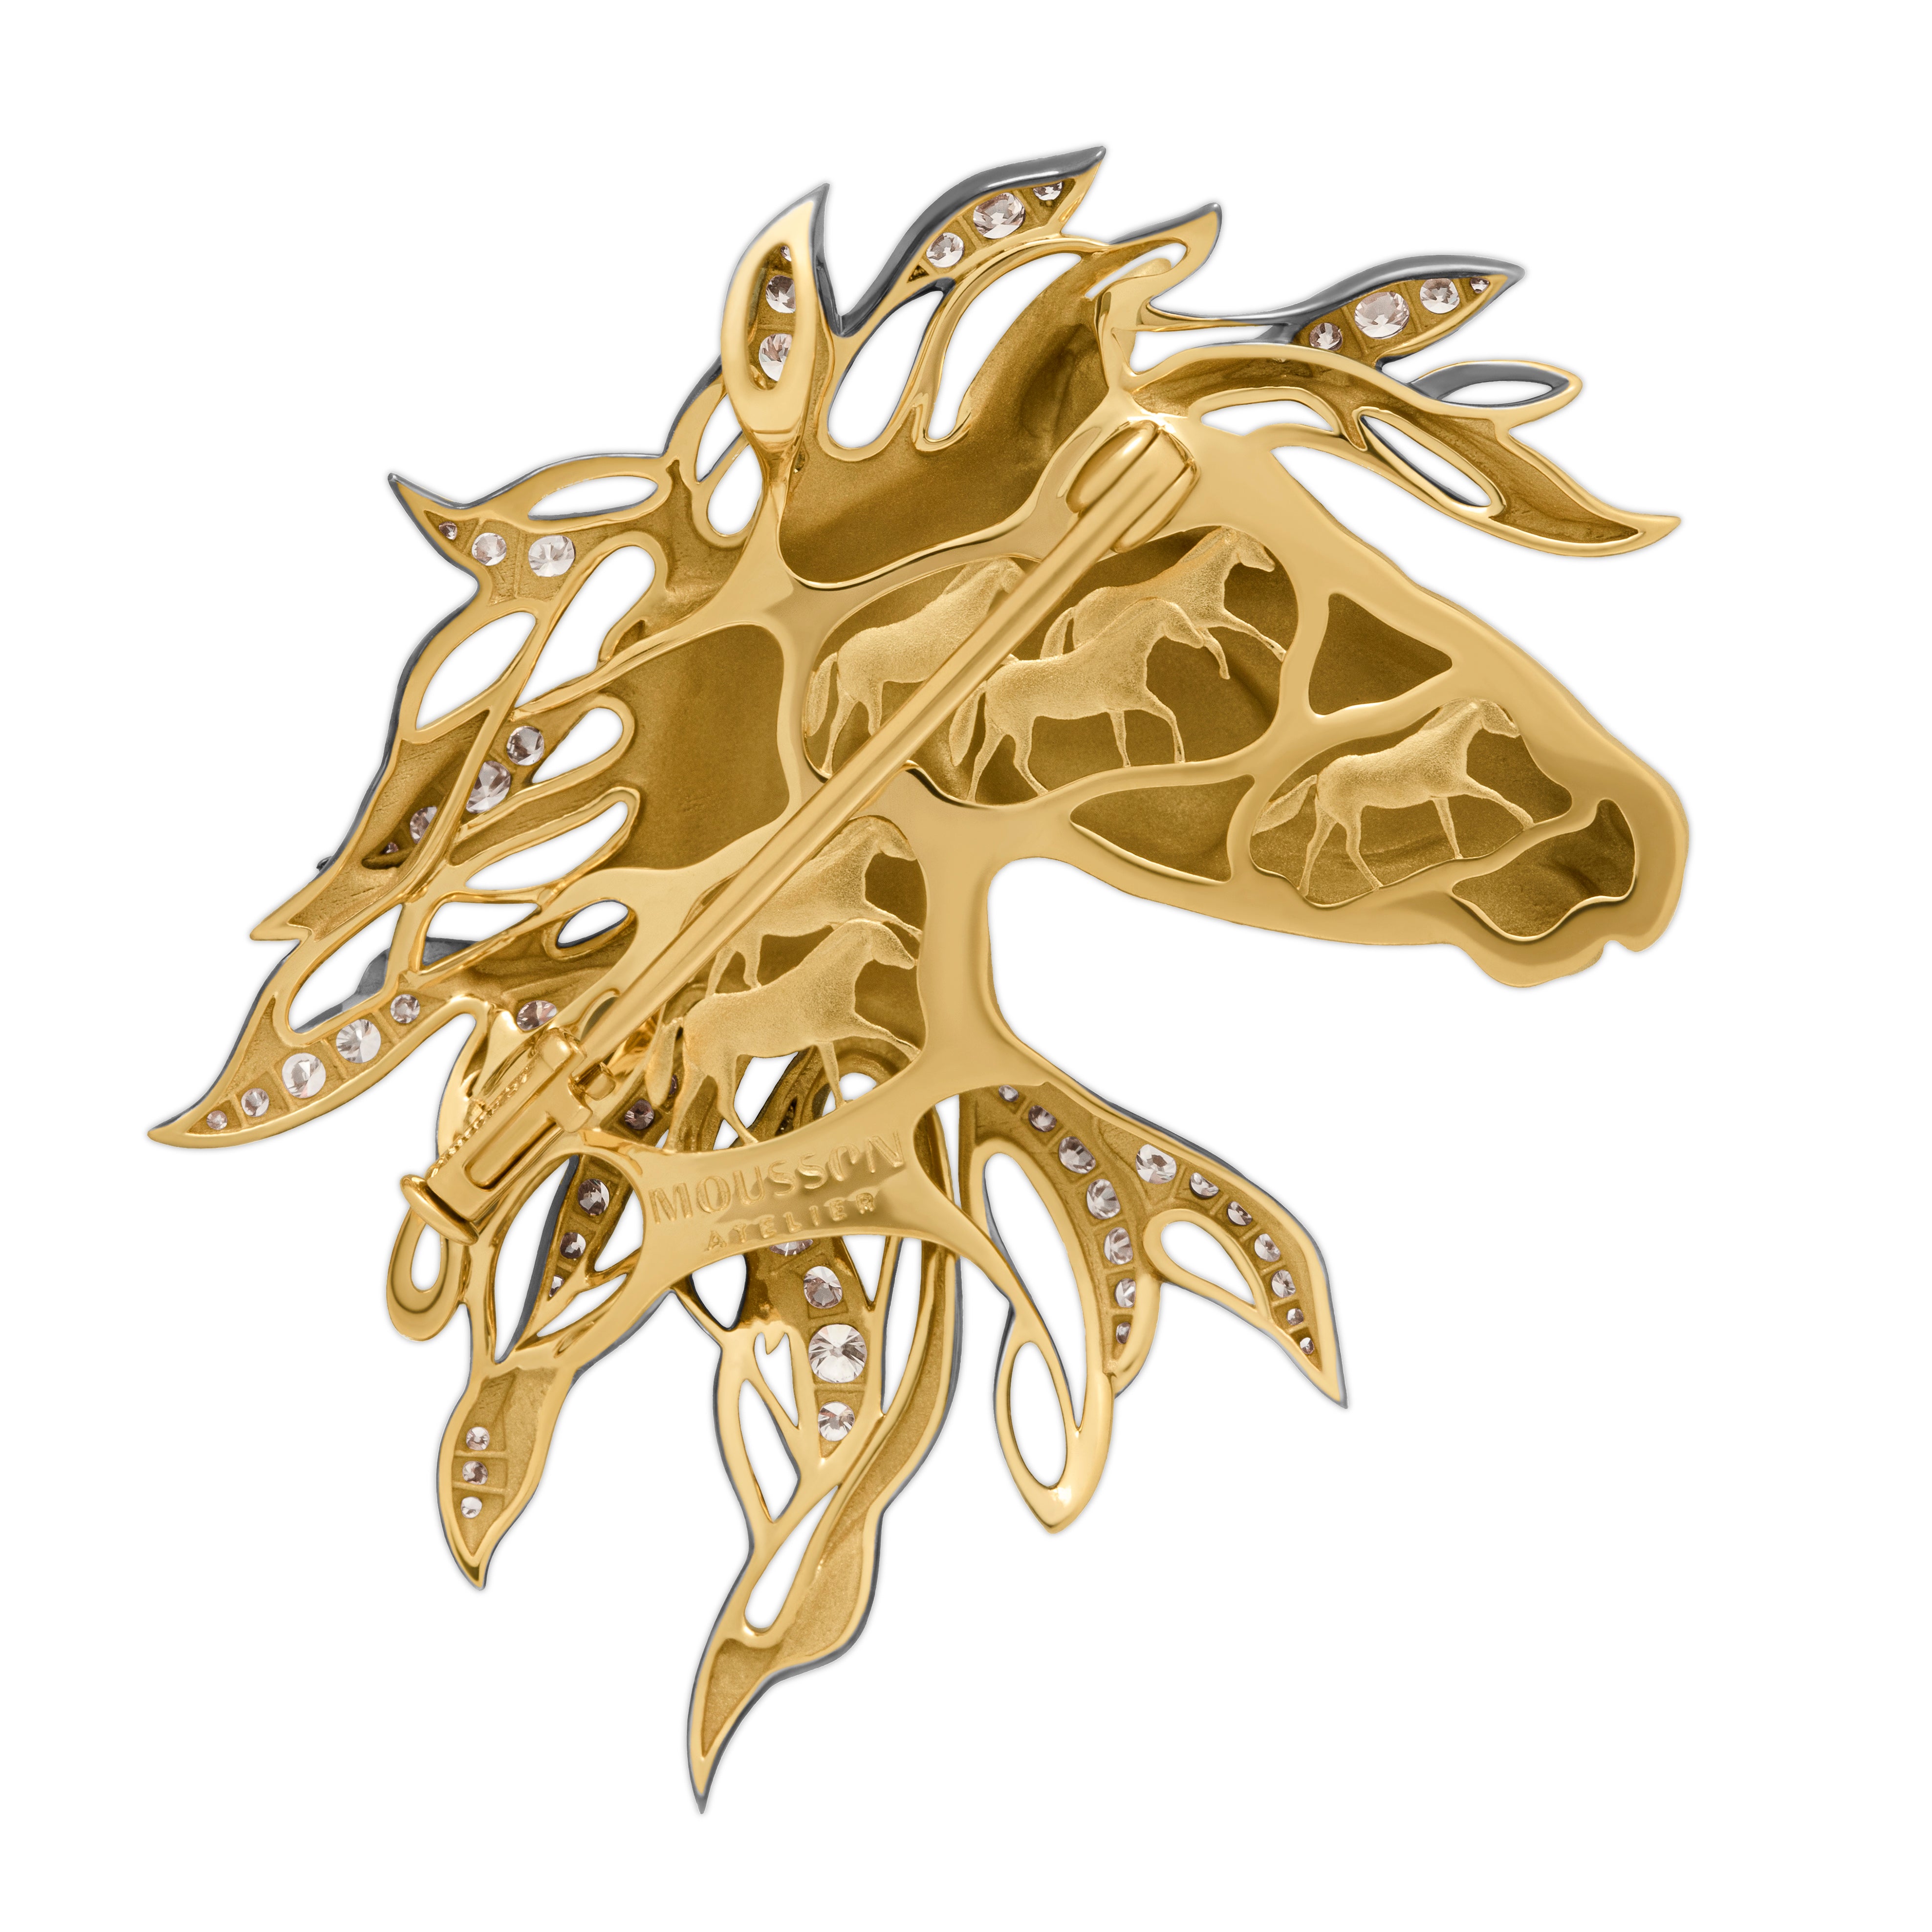 Brs 0231-0, 18K Yellow Gold, Champagne Diamonds Horse Head Brooch